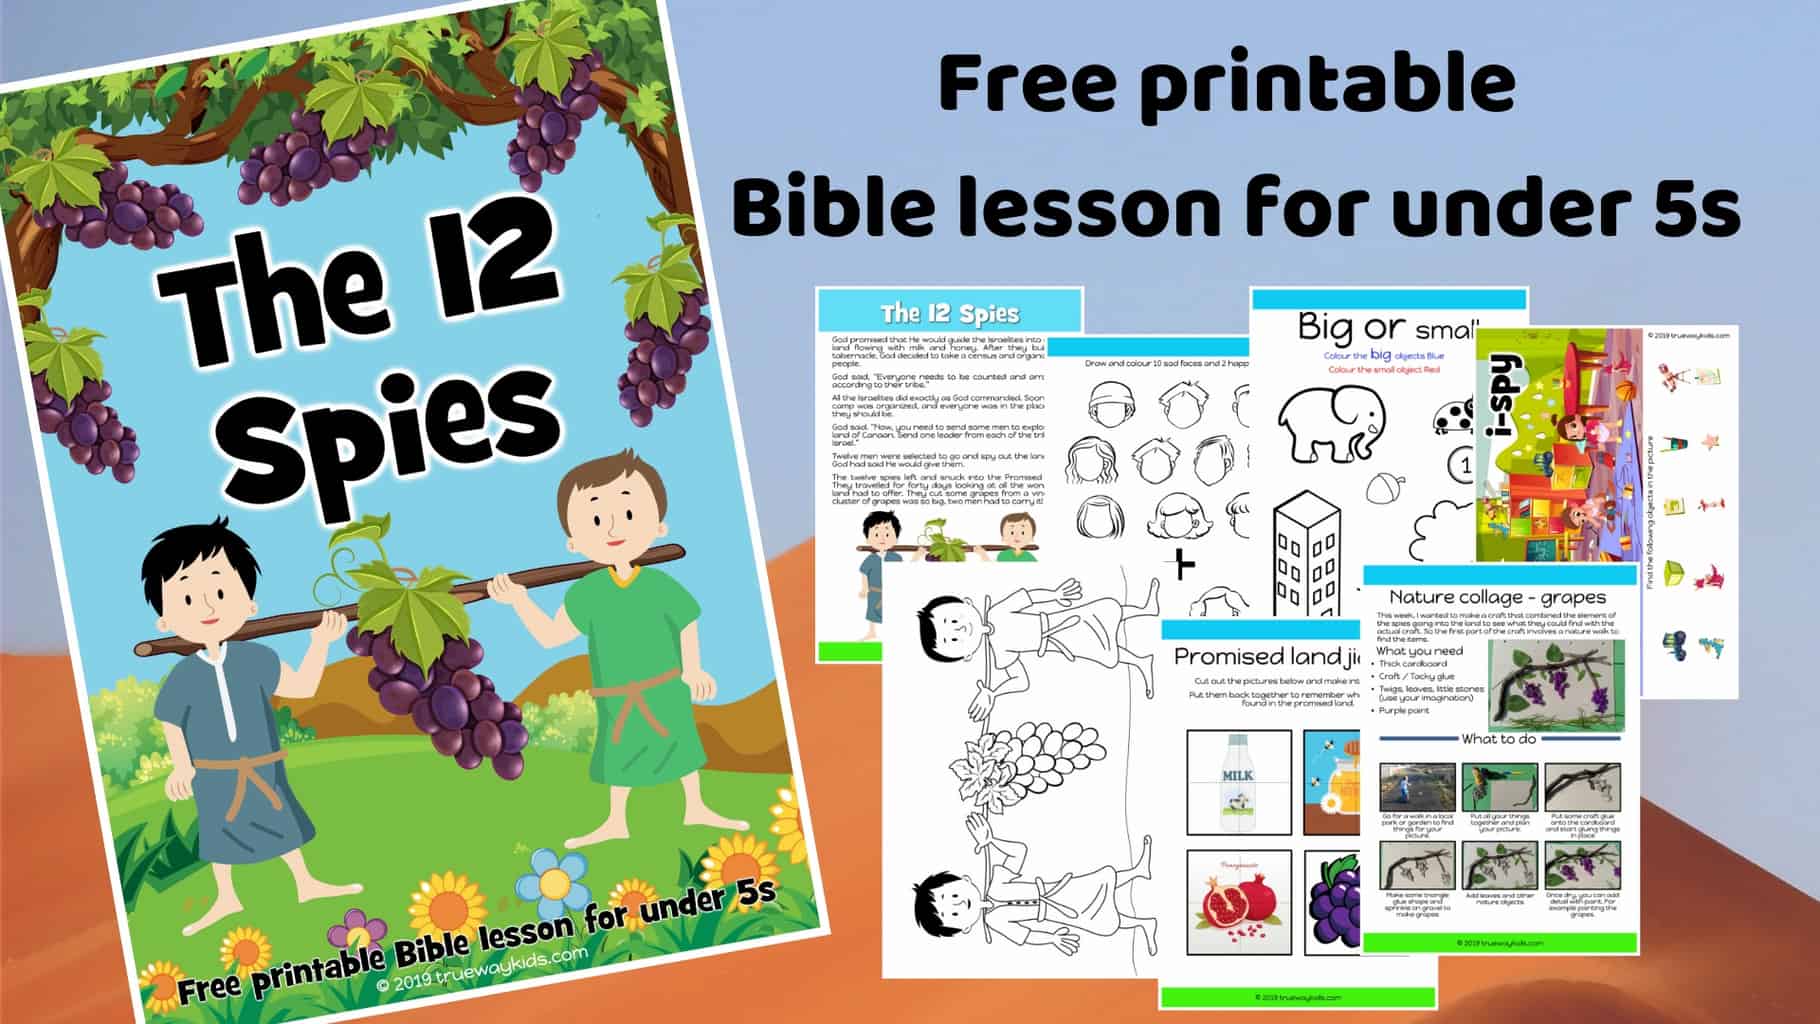 the-12-spies-and-the-promised-land-free-bible-lesson-for-under-5s